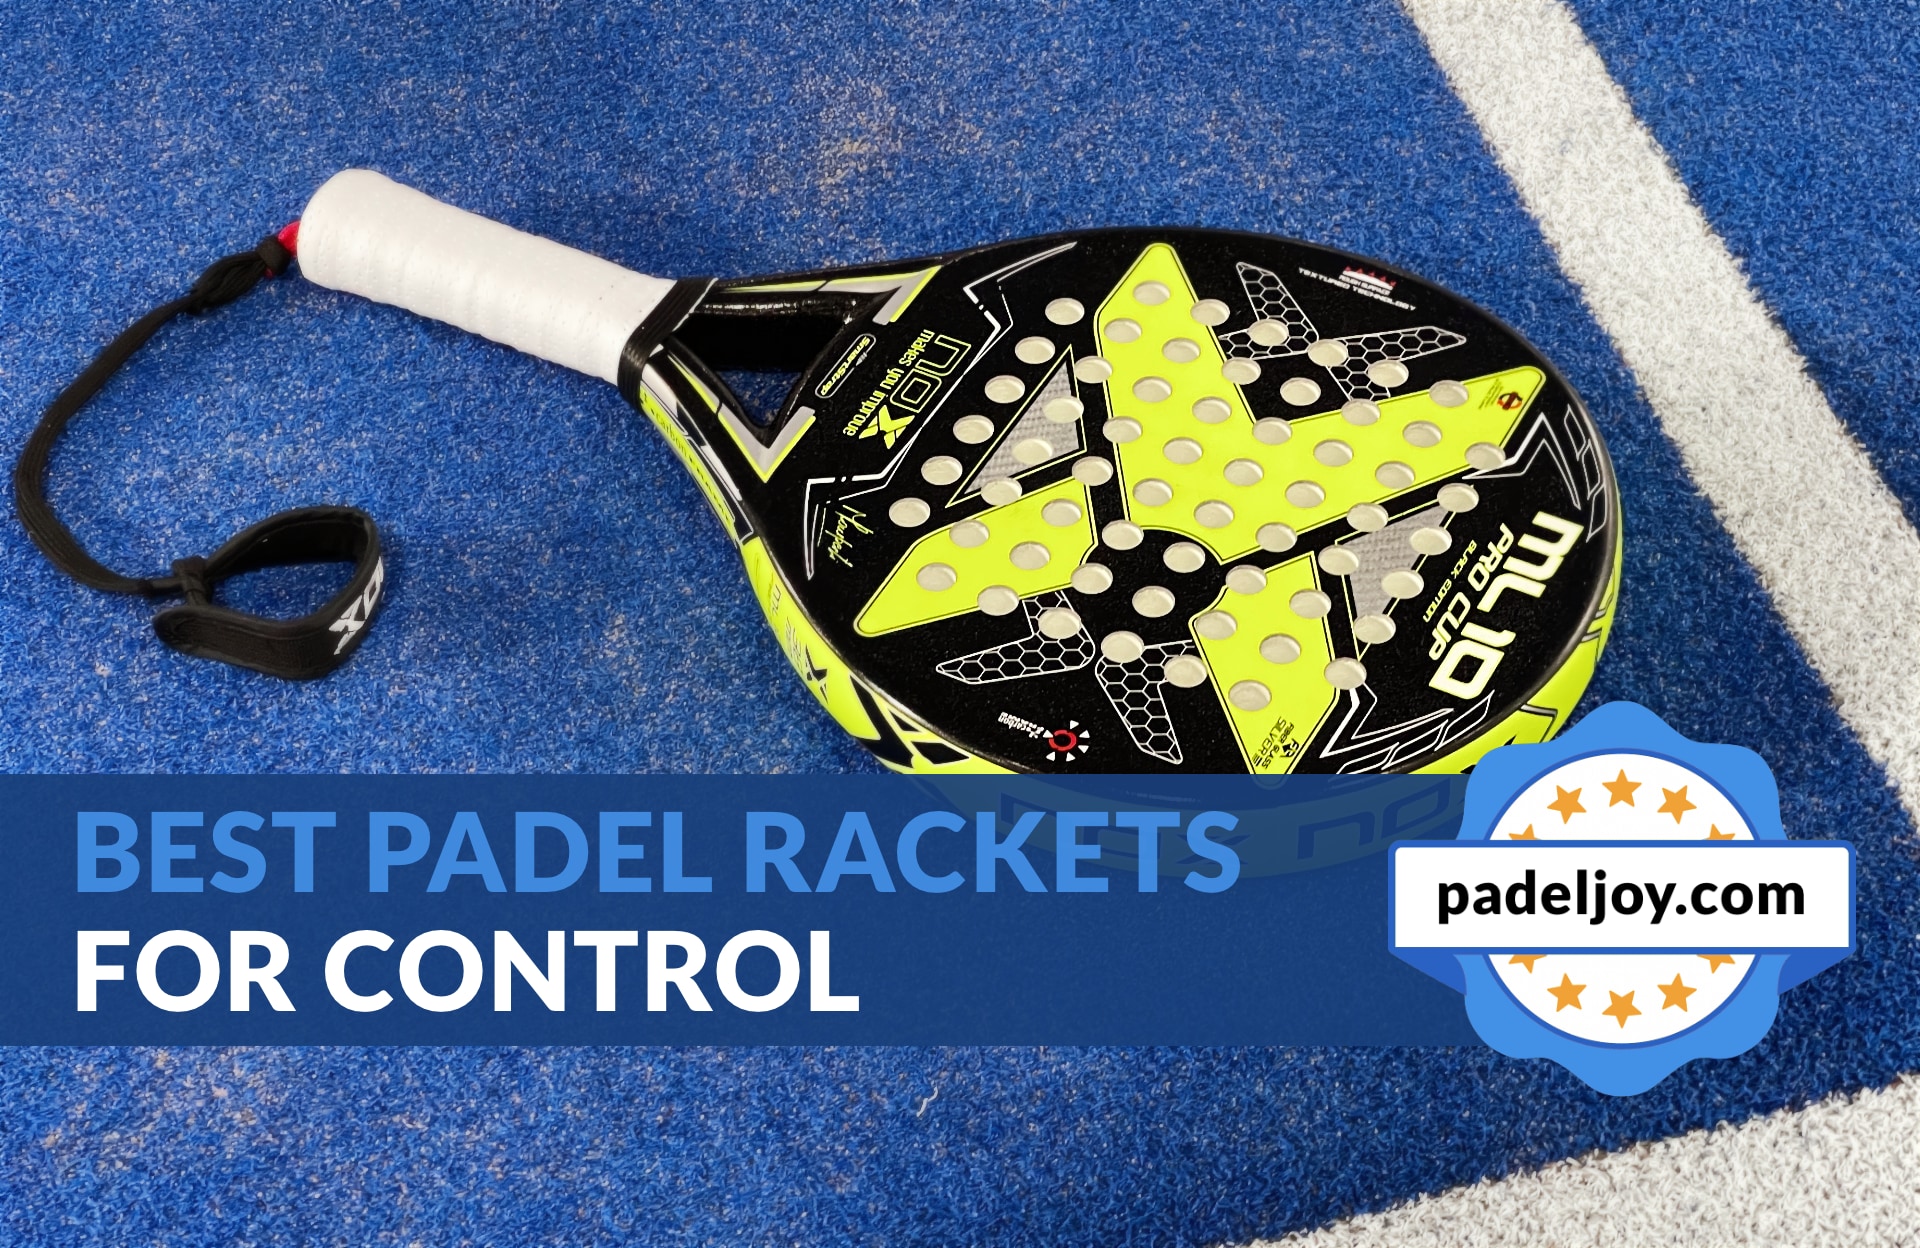 Best Padel Rackets for Control 2022: Top 3 Round Rackets